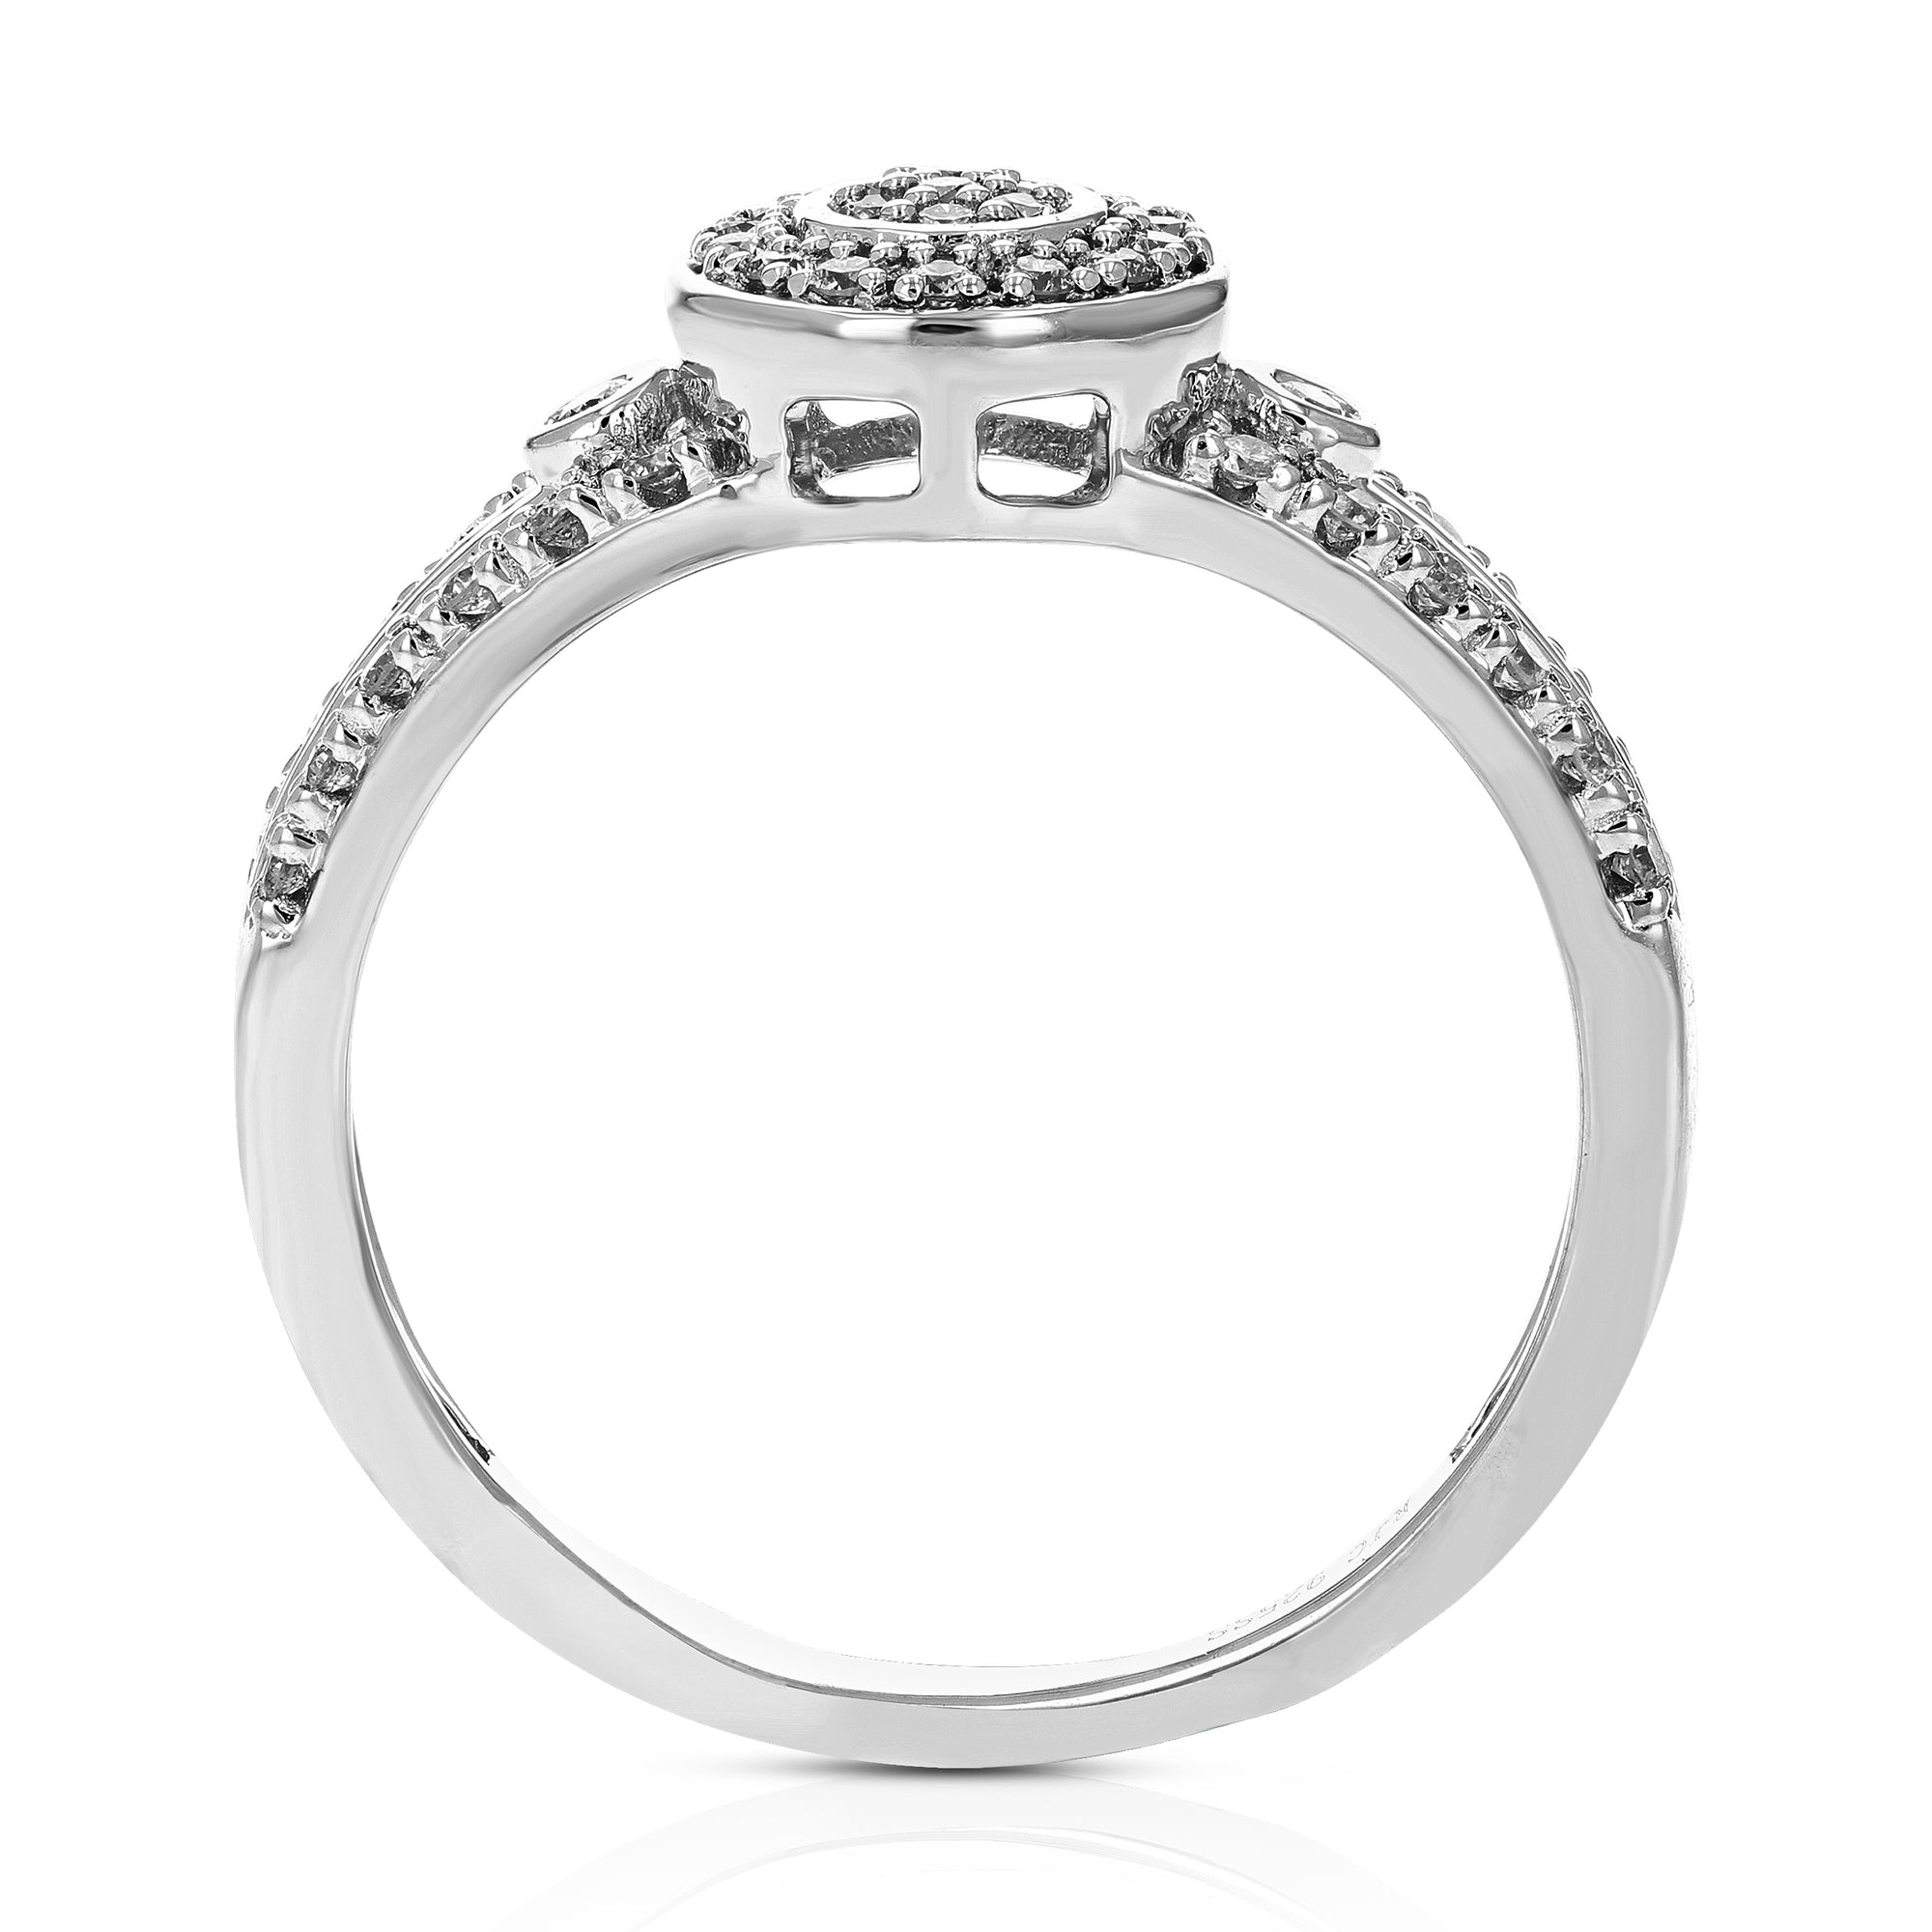 1/5 cttw Diamond Engagement Ring for Women, Round Lab Grown Diamond Ring in .925 Sterling Silver, Prong Setting, Size 6-8